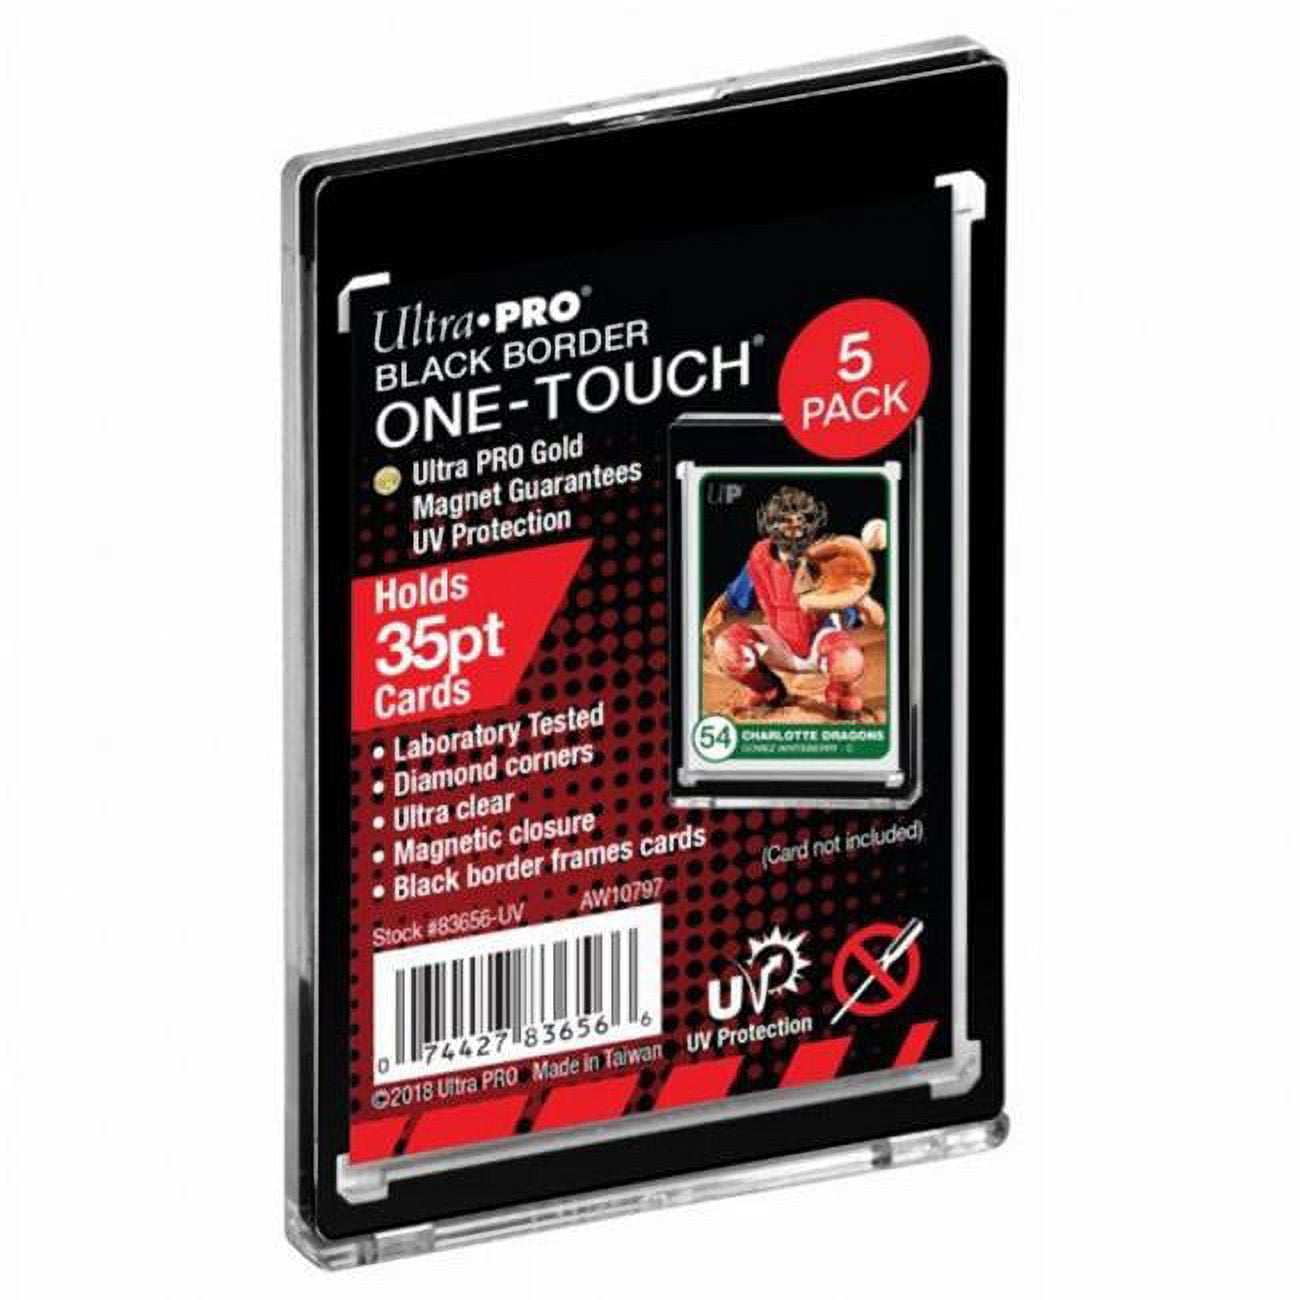 Ulp83656uv 35pt One-touch Playing Cards - Black Border